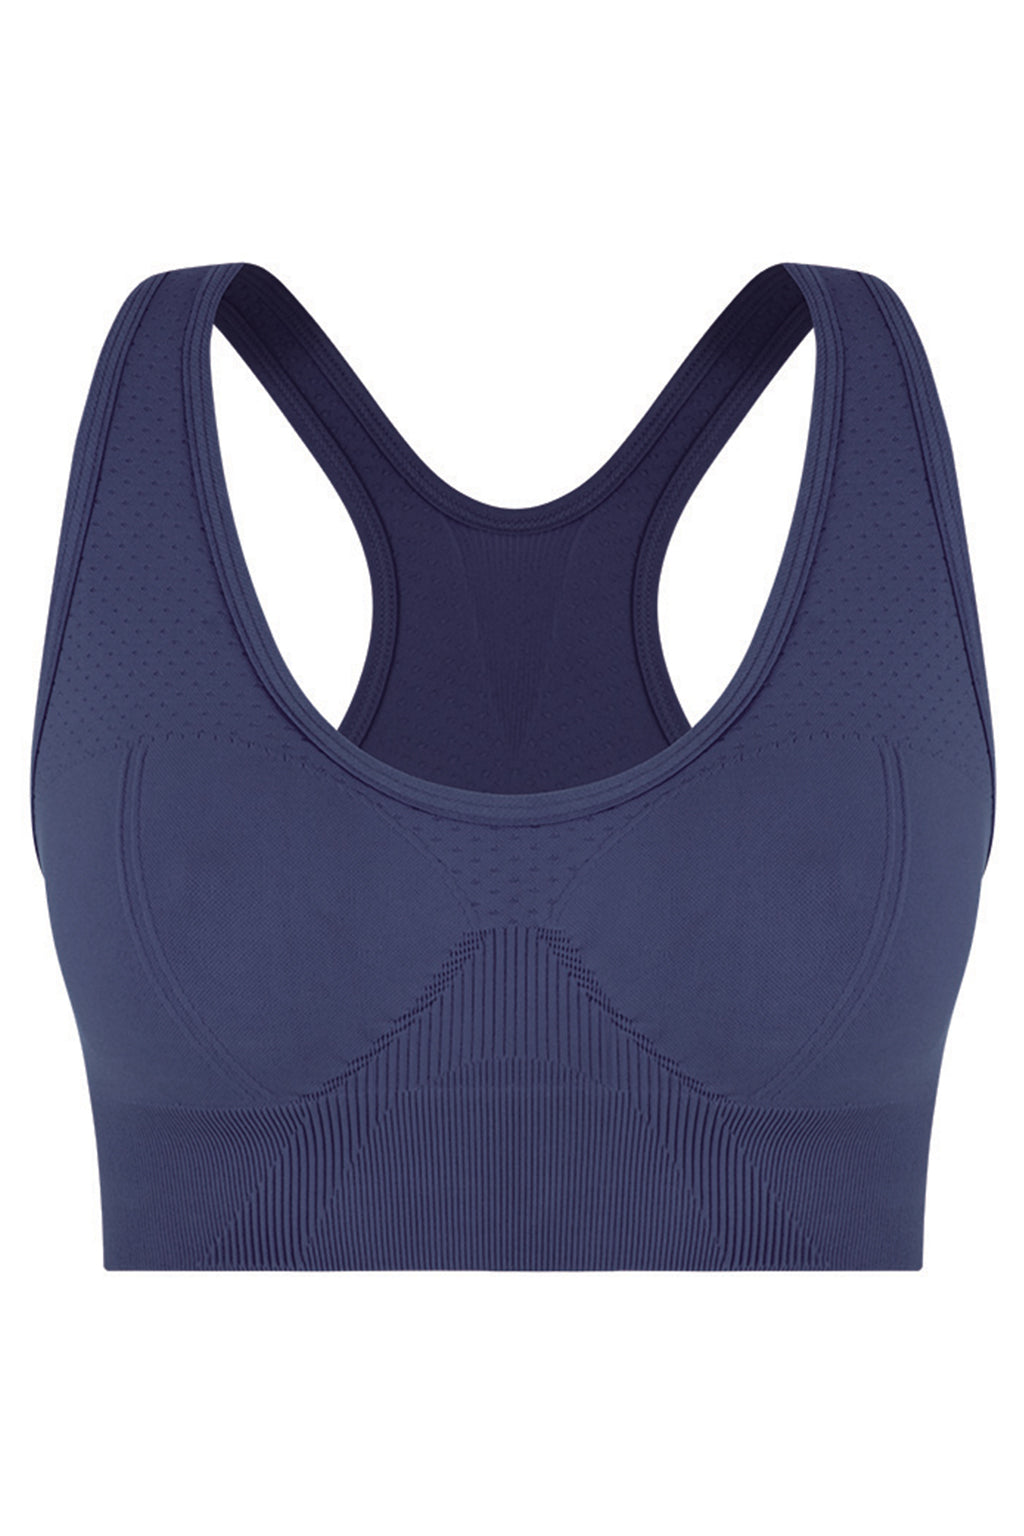 METRO Dept. Store - Seamless Bra with supersoft fabric, removable &  adjustable shoulder straps is now available at METRO Department Store and  METRO Easy Shop. • Get special offer buy 3 for